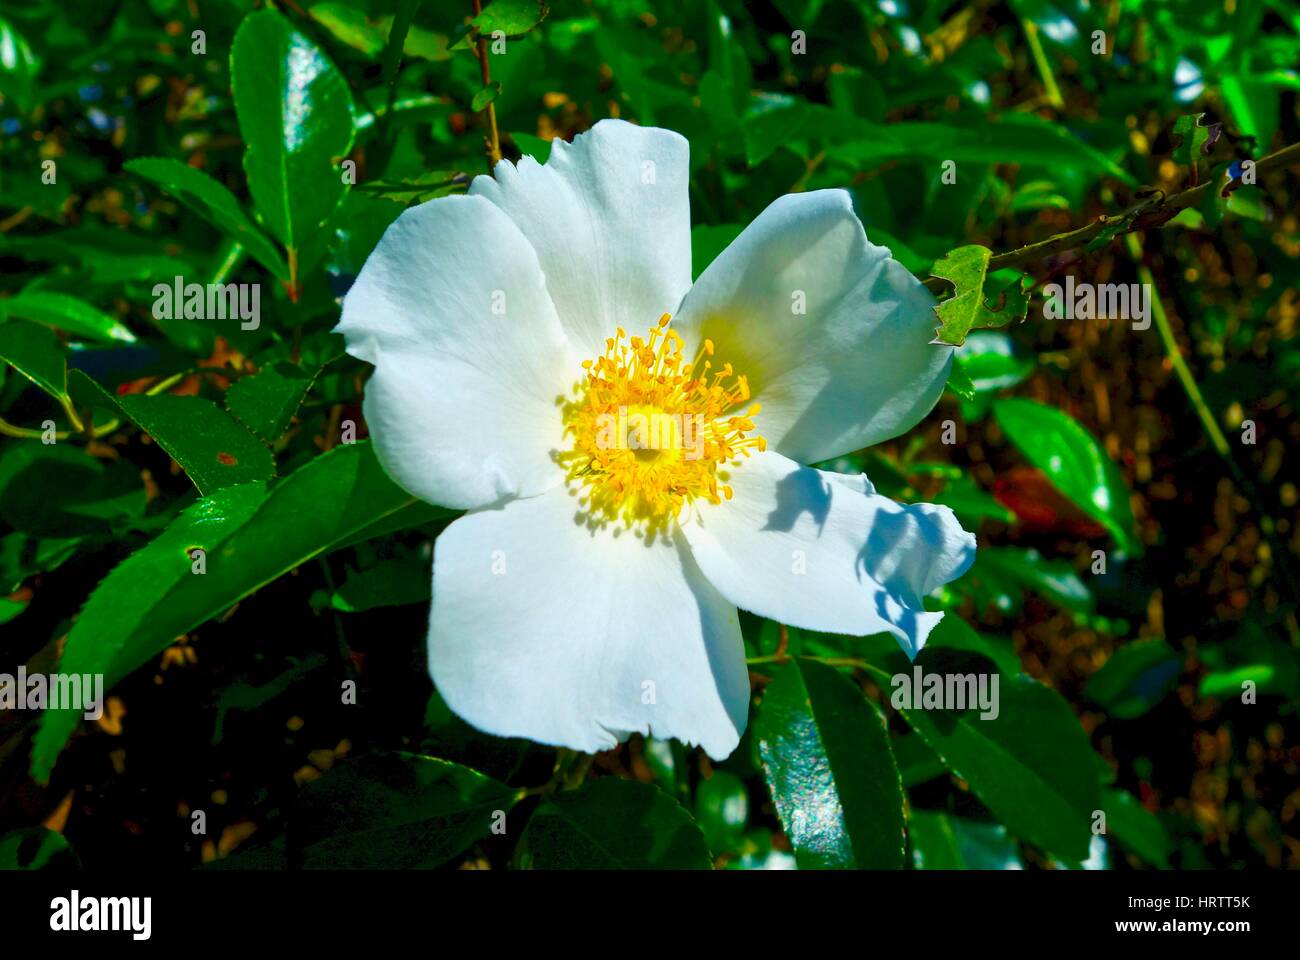 Close up of a white Confederate Rose blooming on a warm spring day in a forest. Stock Photo